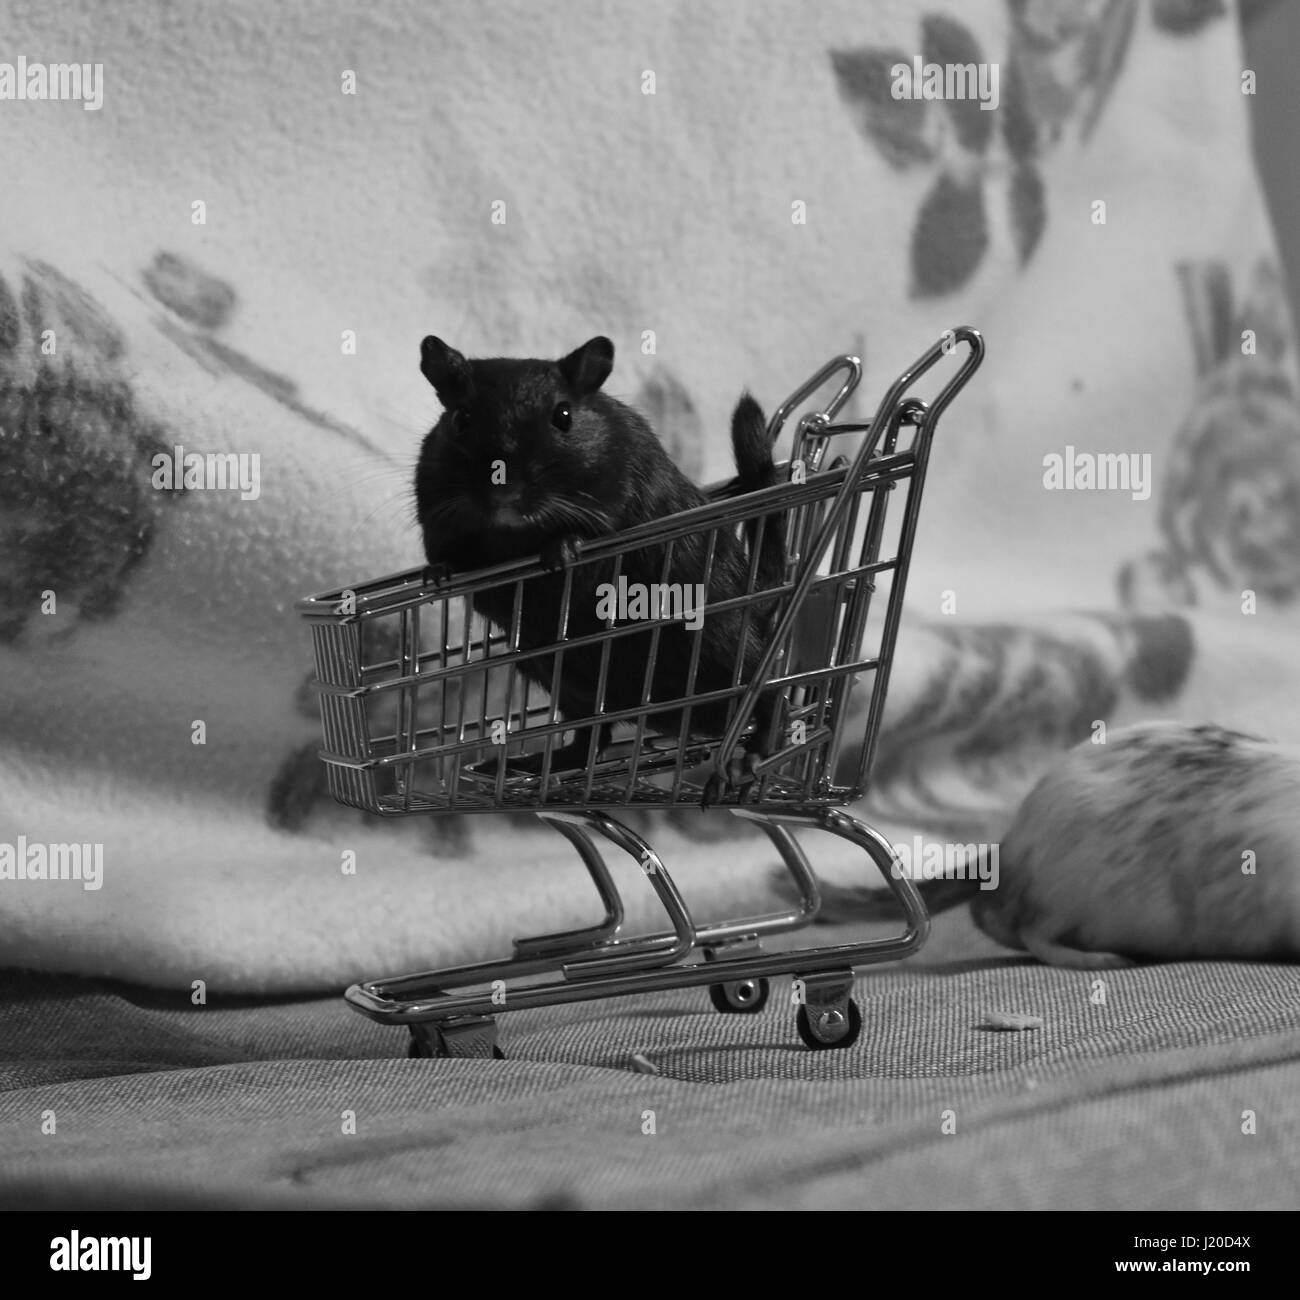 Black gerbil sitting in a miniature shopping trolley Stock Photo